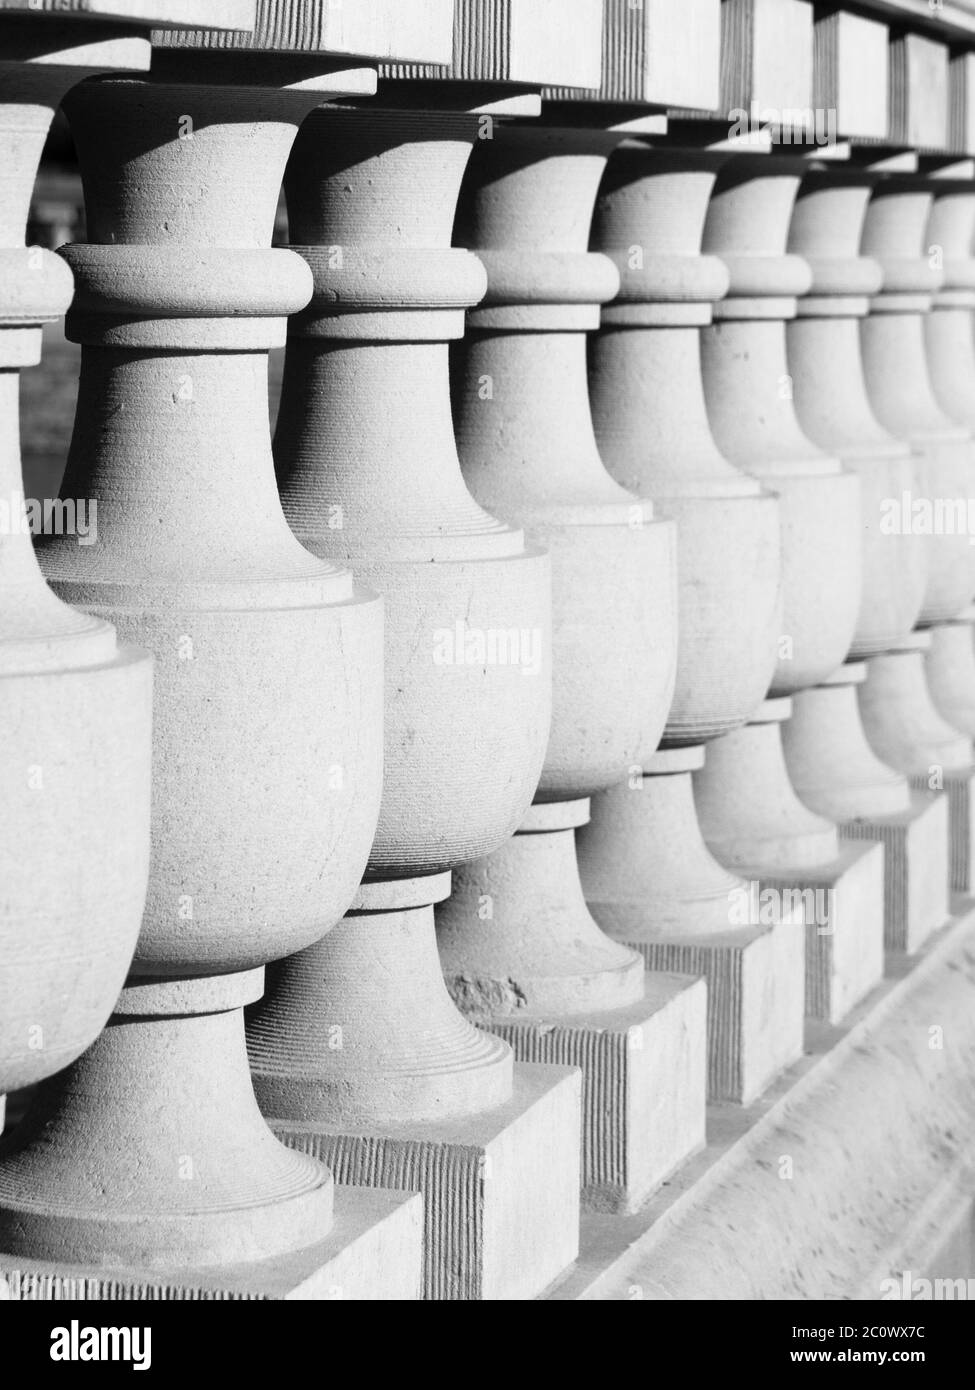 Ornamental stone balustrade. Detailed perspective view. Black and white image. Stock Photo